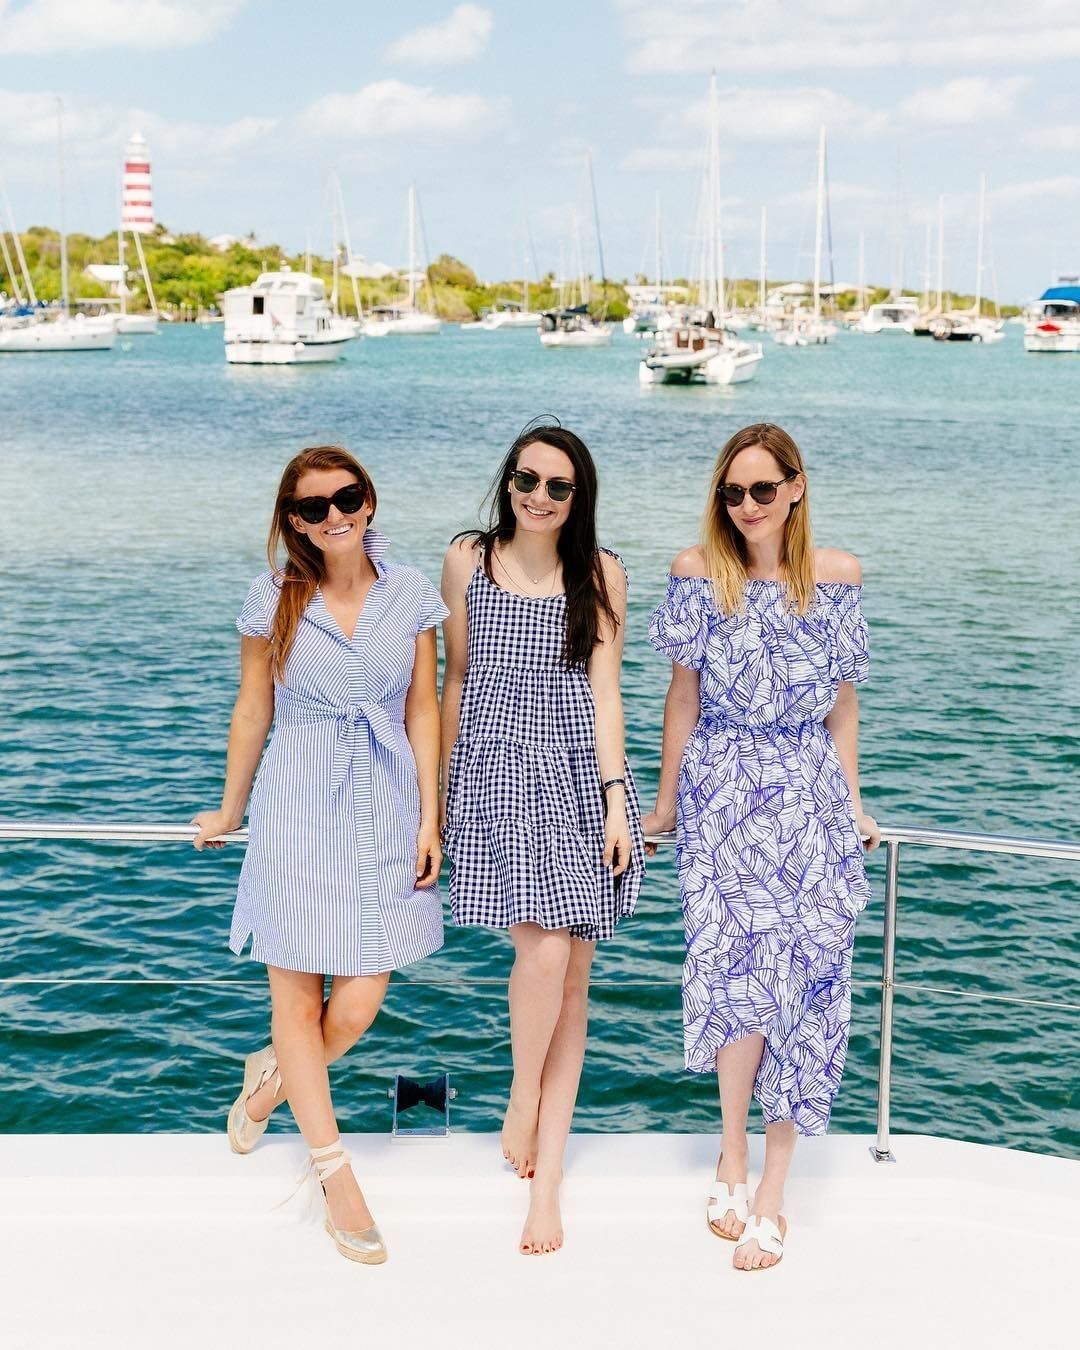 Take a tip in bestie boating chic care of @carly and crew's blue hued frocks